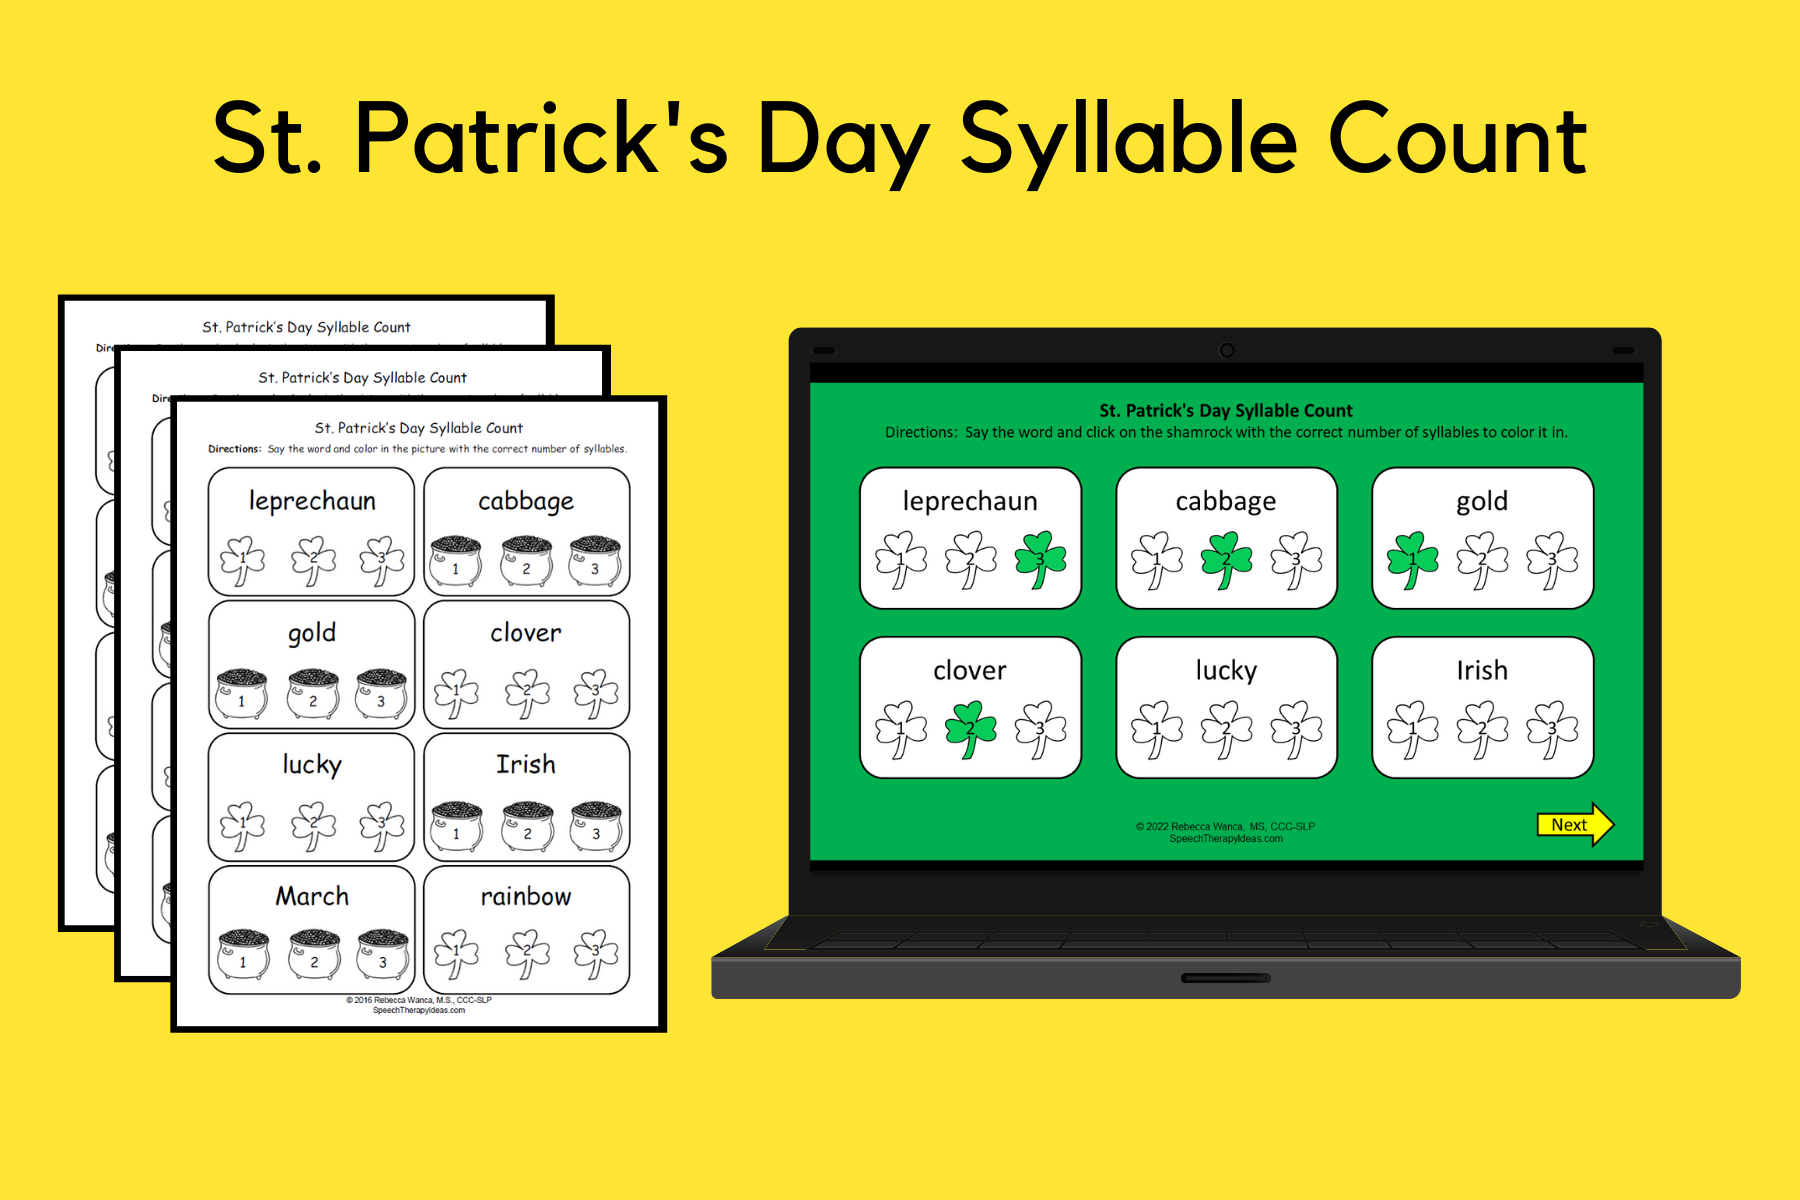 St. Patrick’s Day Syllable Count